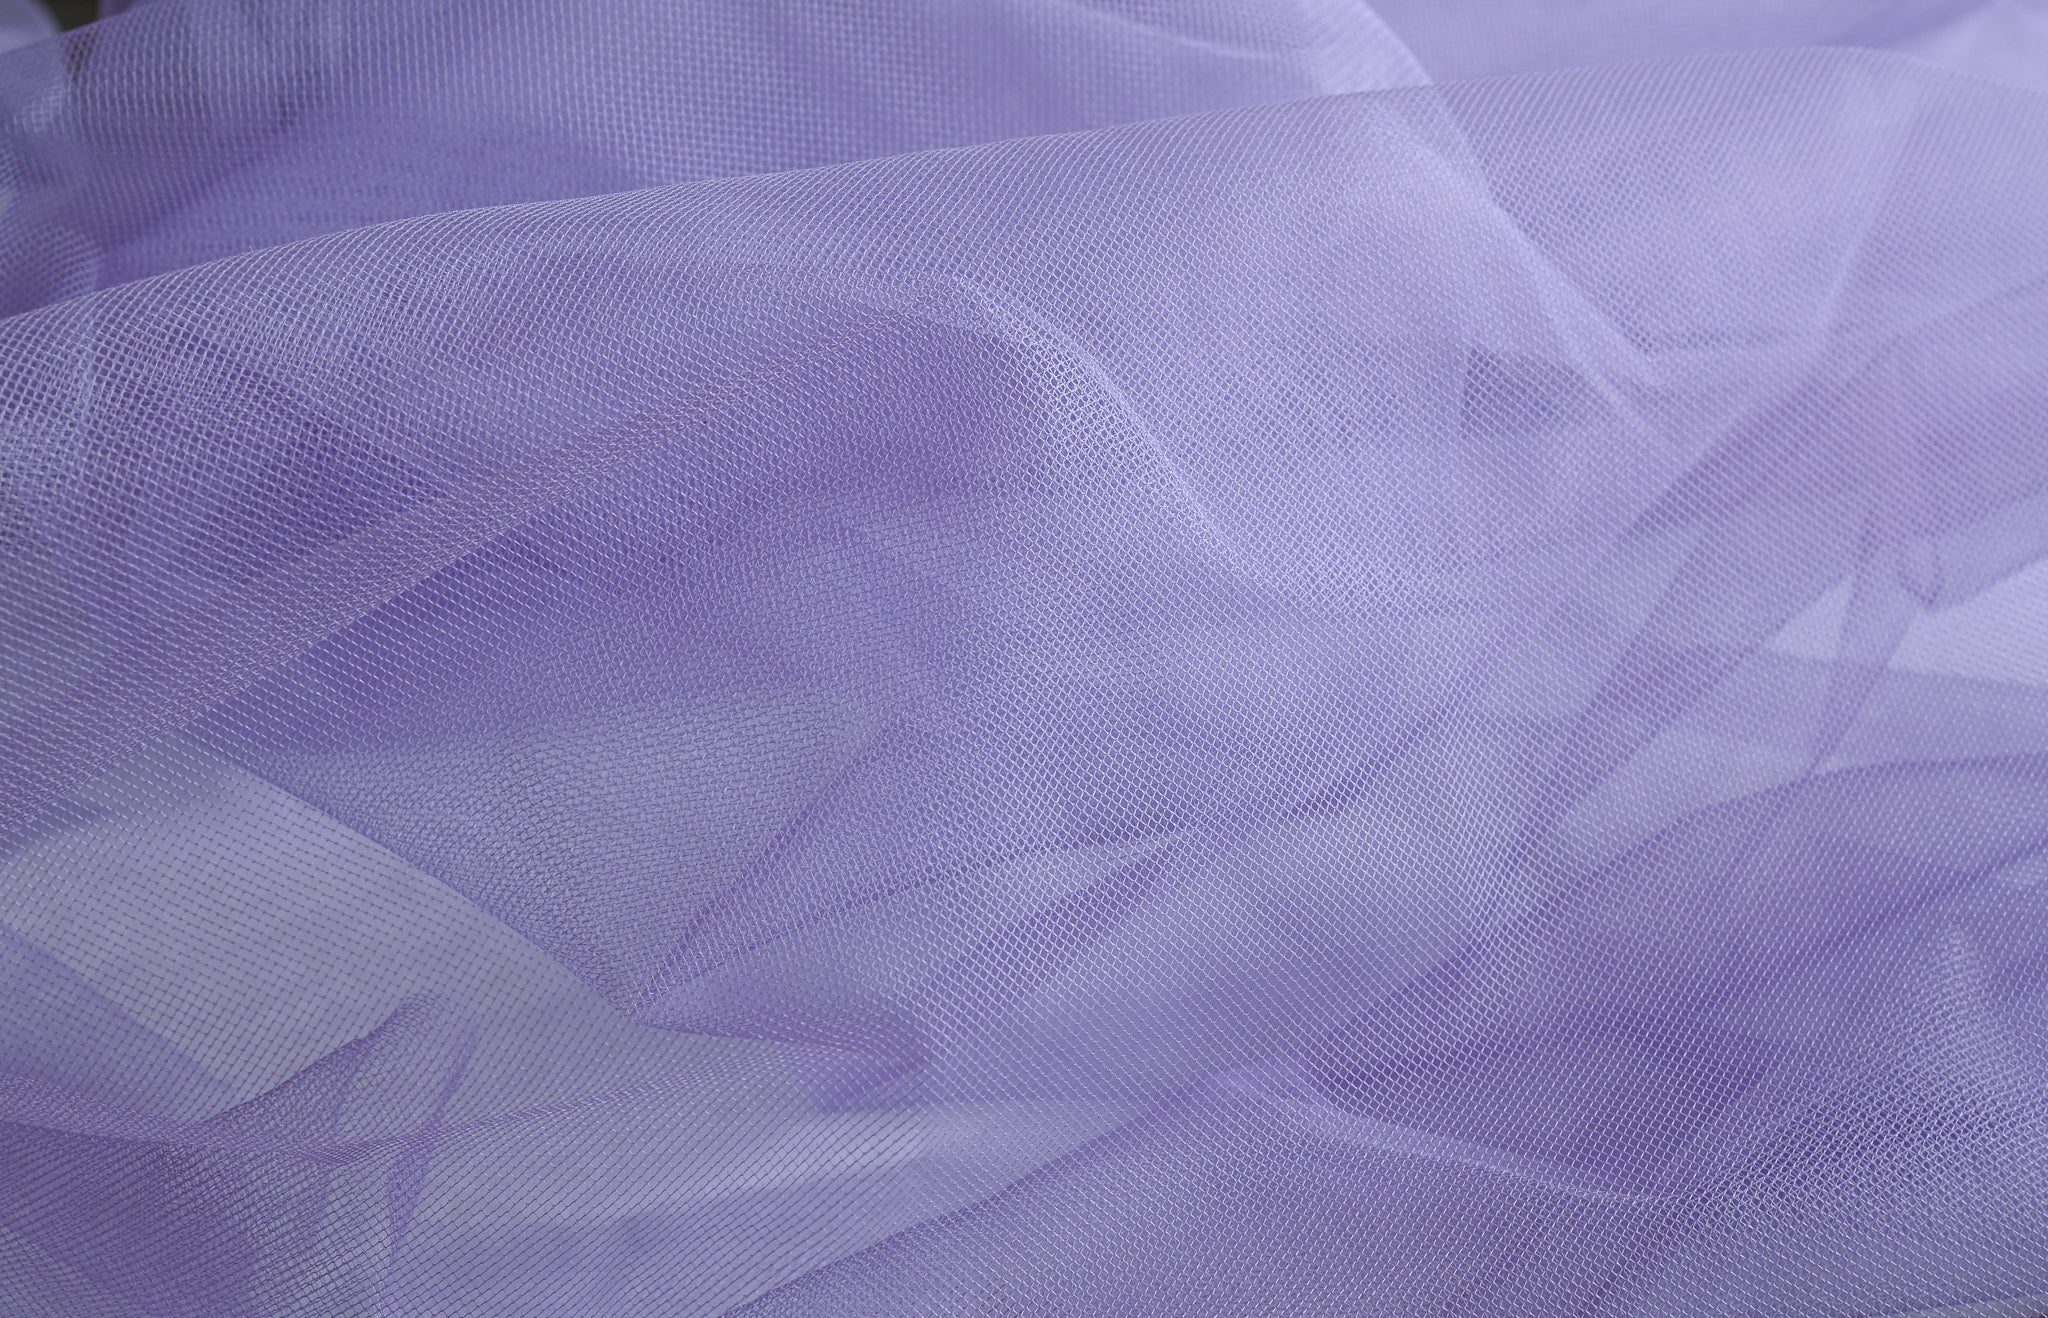 Mountains of Snow (Lilac) - Polyamide Tulle